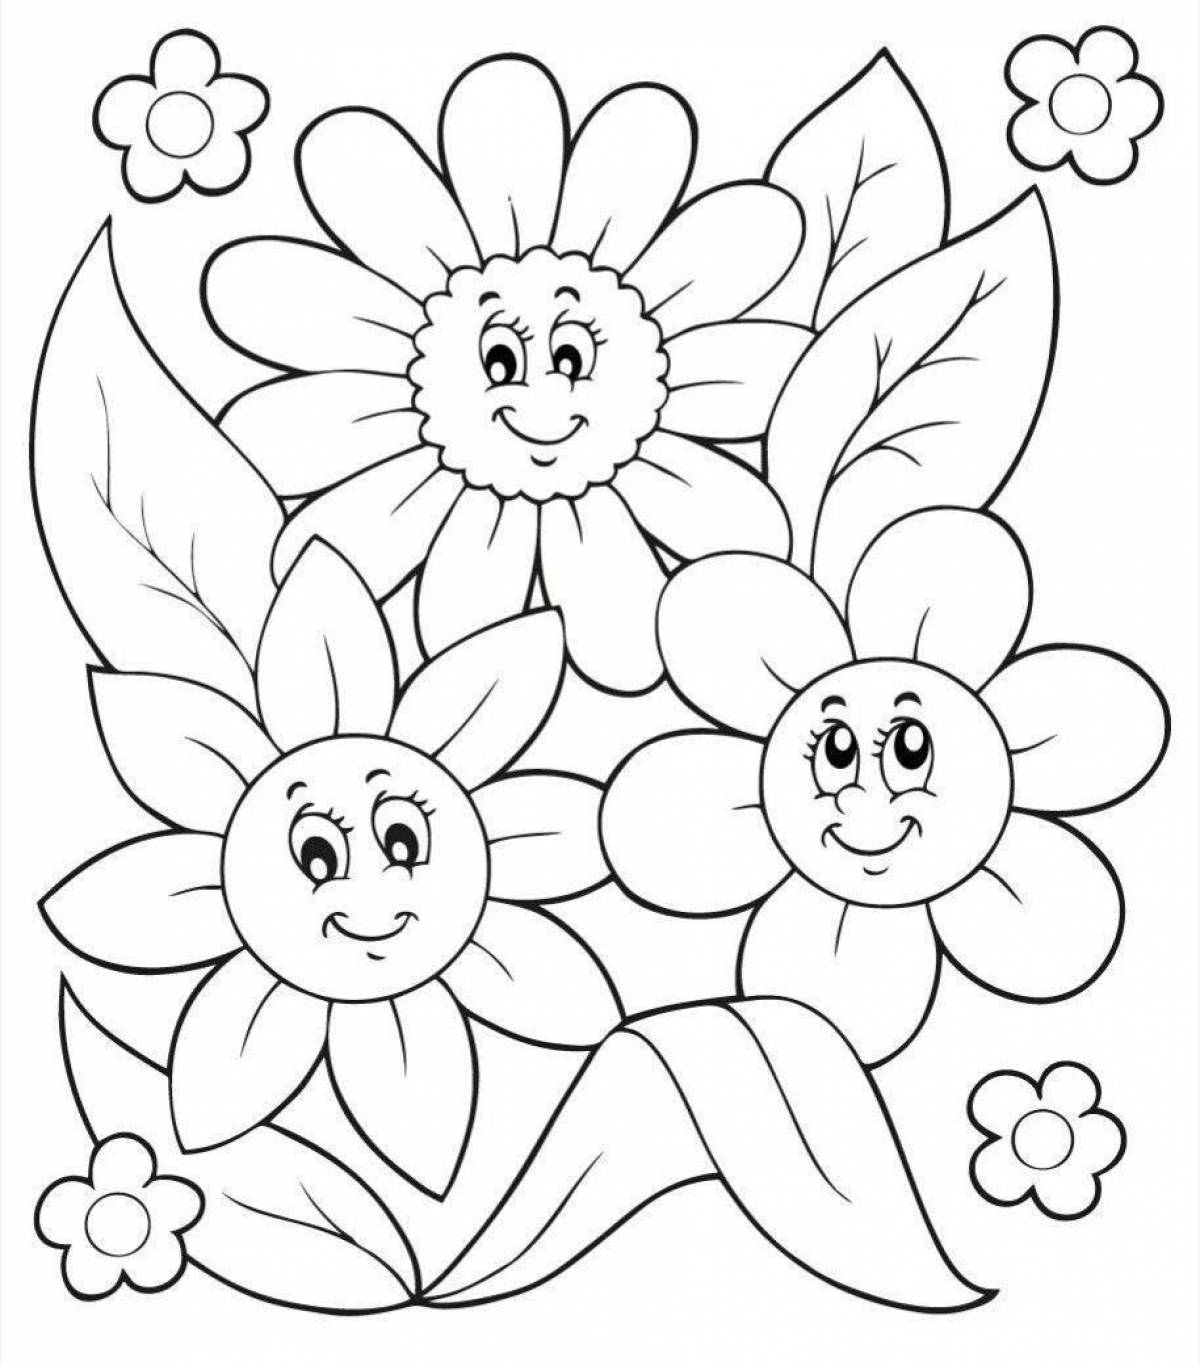 Amazing flower coloring pages for 6-7 year olds